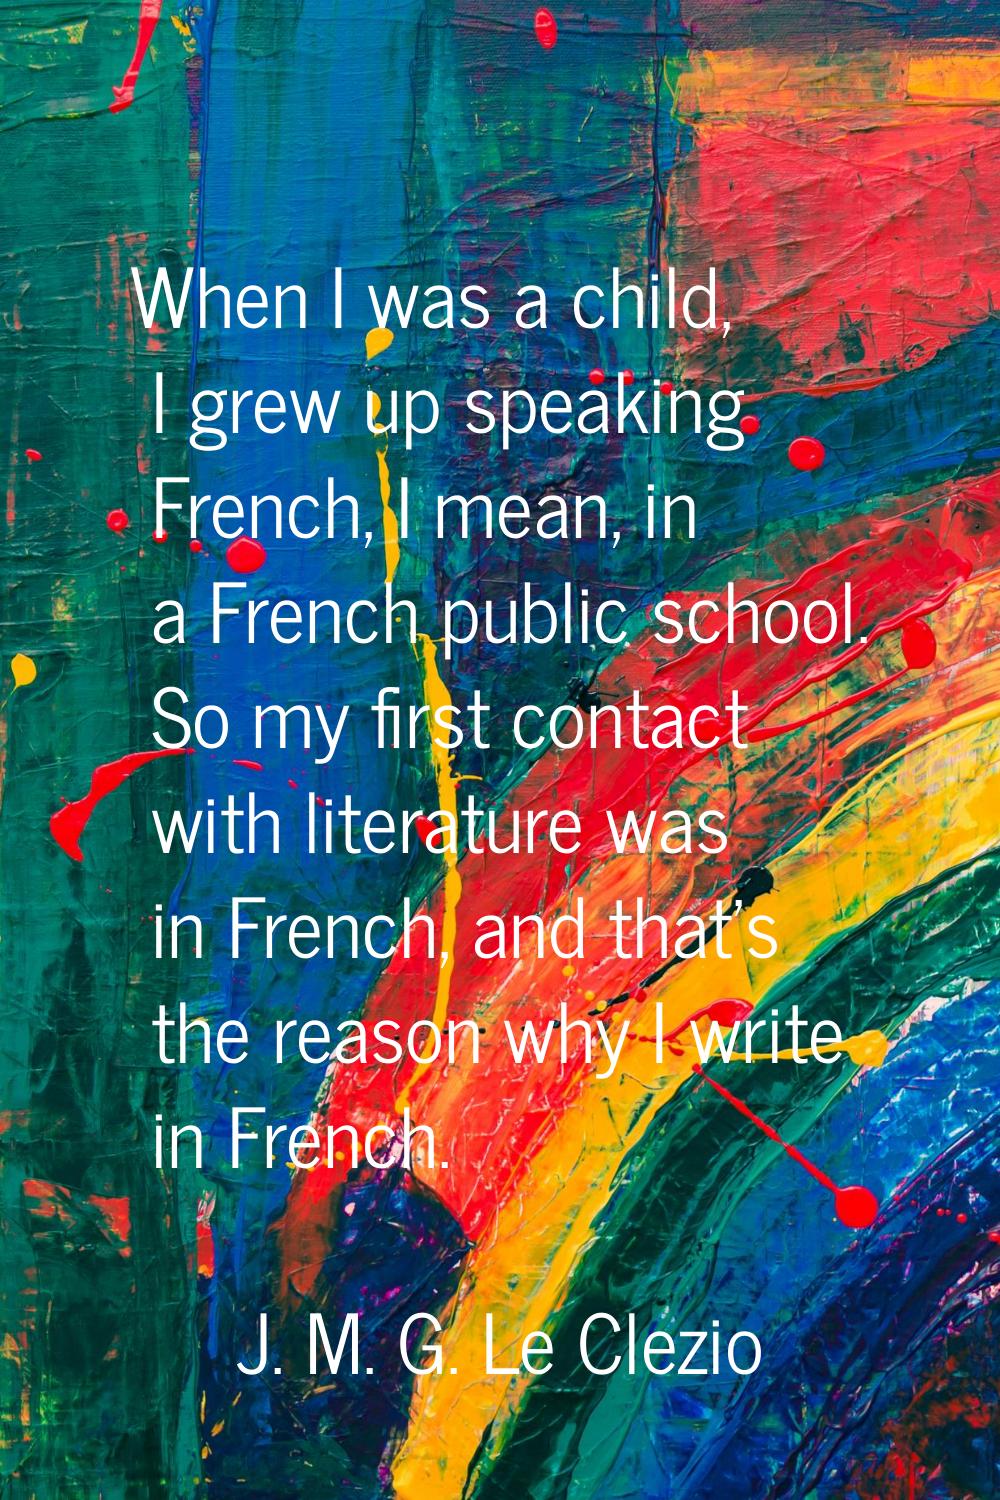 When I was a child, I grew up speaking French, I mean, in a French public school. So my first conta